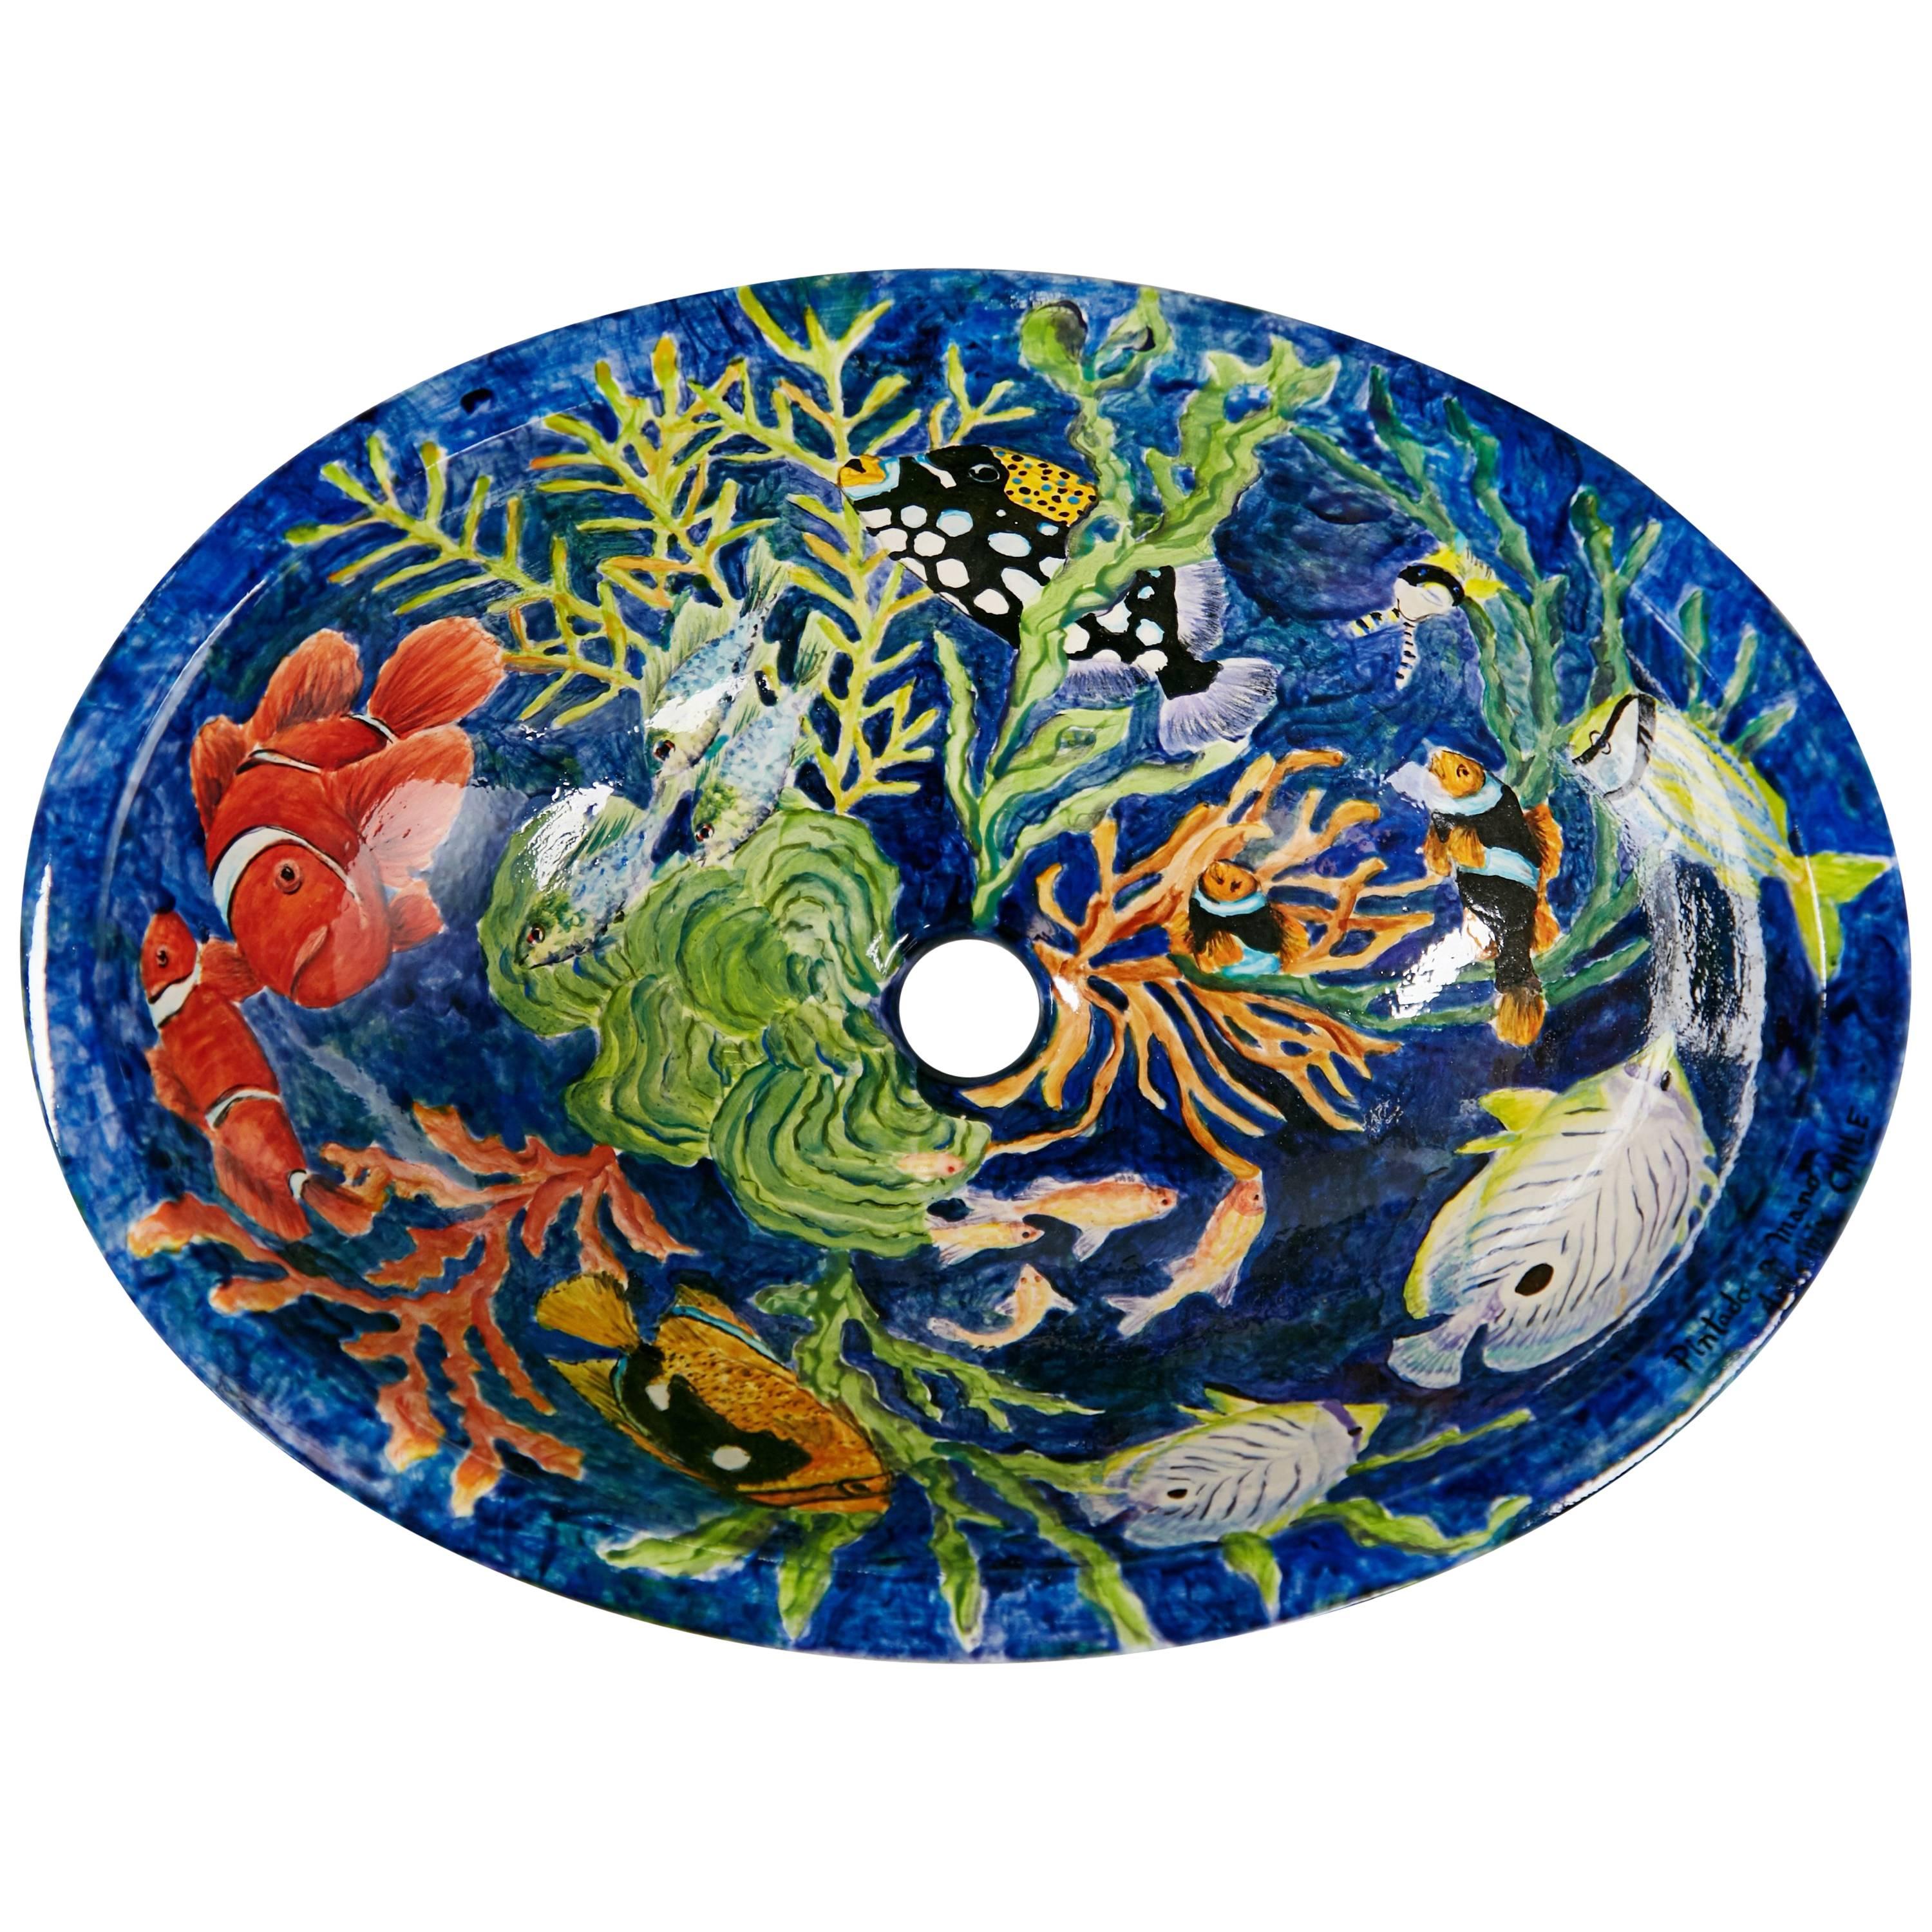 Hand-Painted Aquatic Porcelain Sink, Chile 20th Century